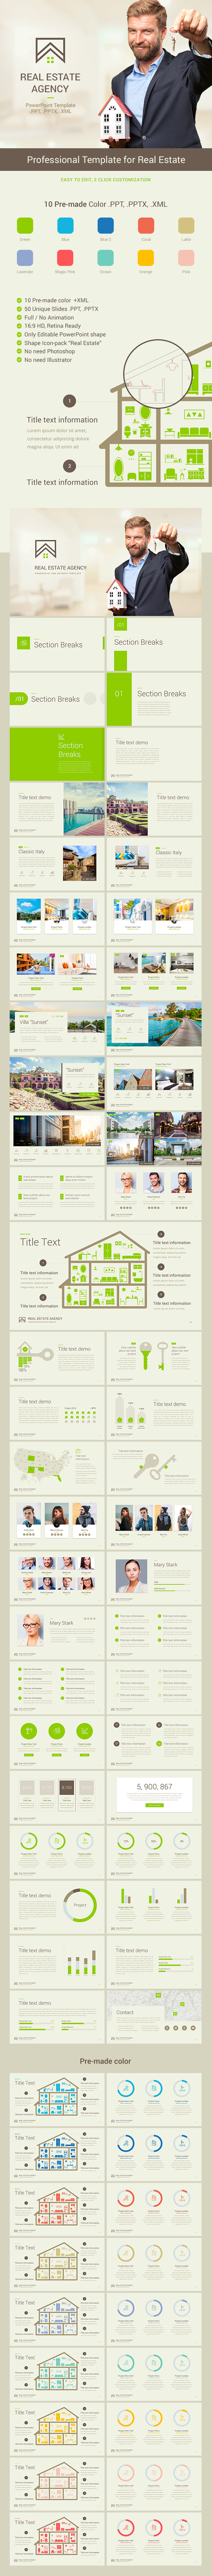 Real Estate PowerPoint Presentation Template